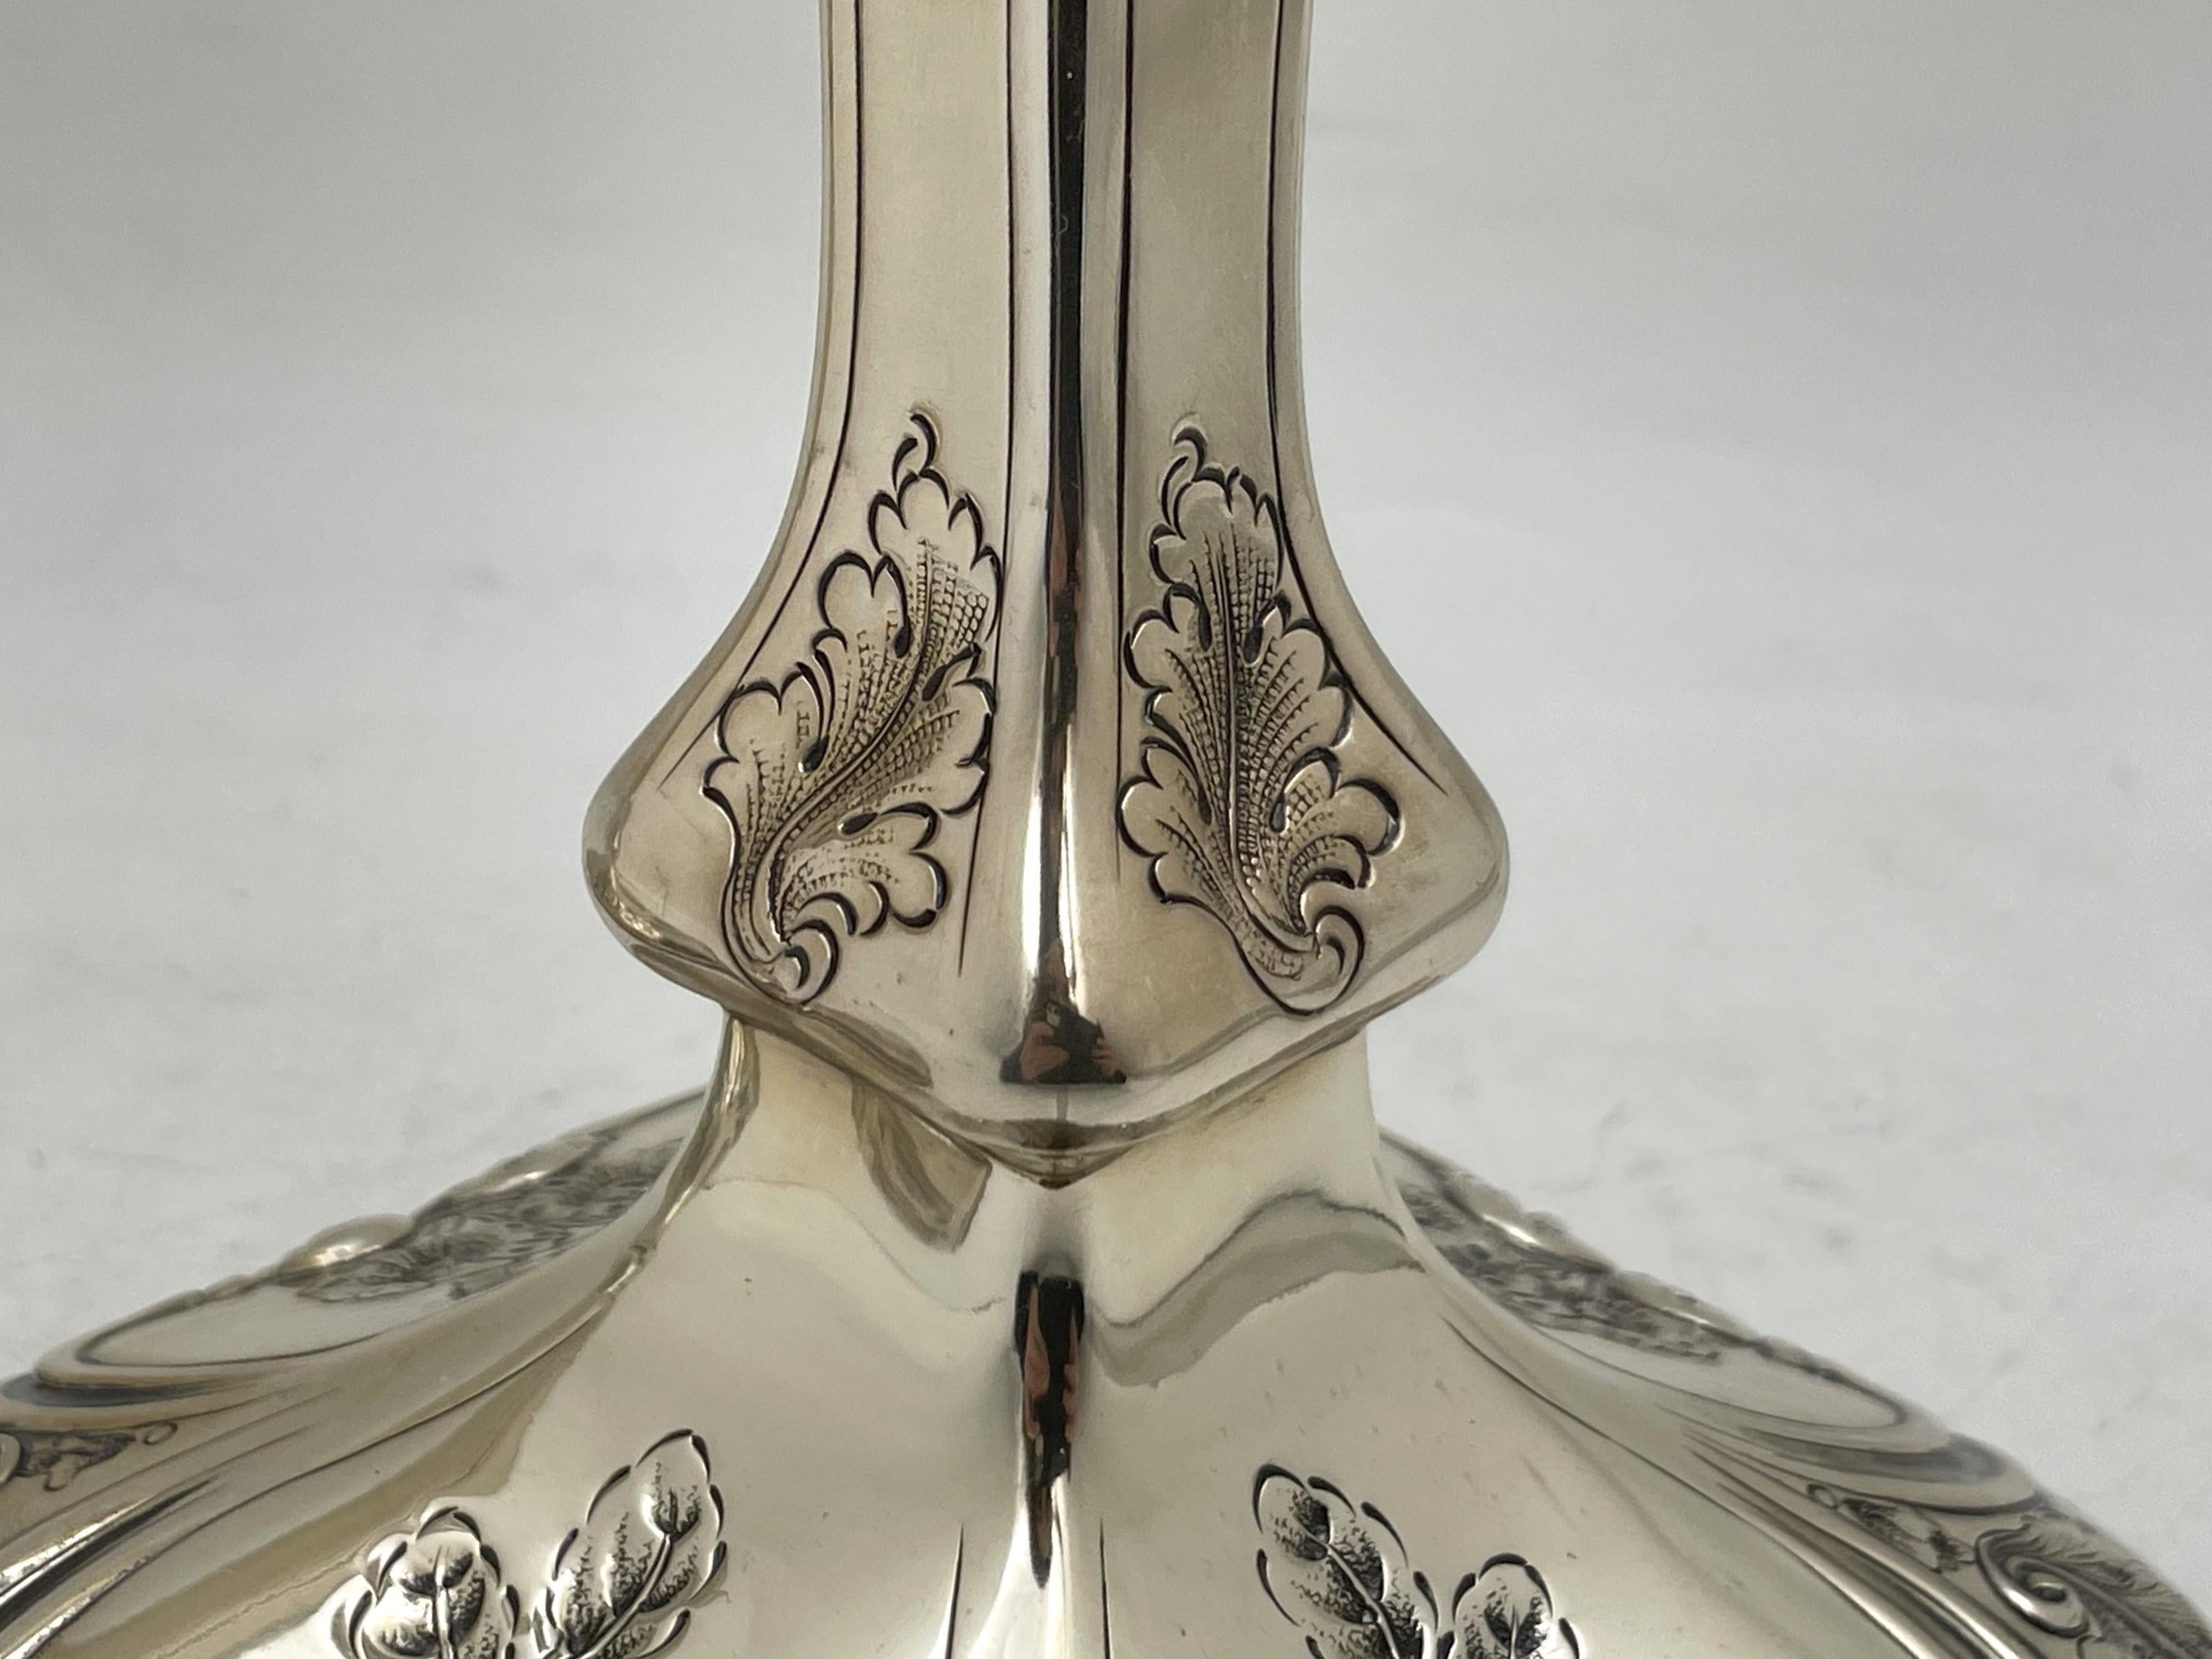 Shreve & Co. Set of 4 Sterling Silver Candlesticks in Art Nouveau Style For Sale 3